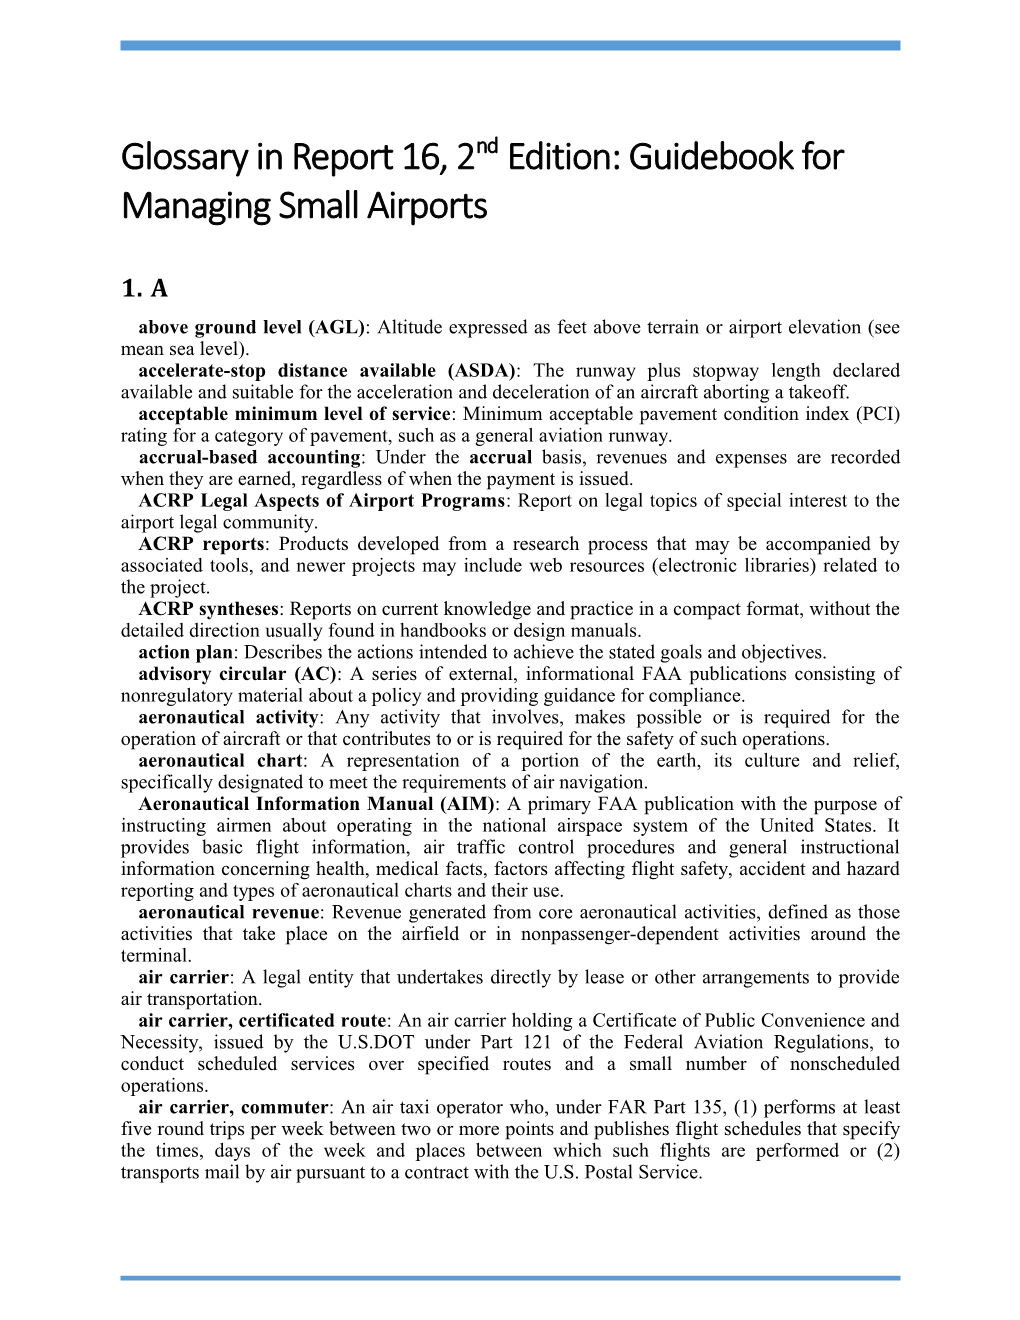 Glossary in Report 16, 2Nd Edition: Guidebook for Managing Small Airports